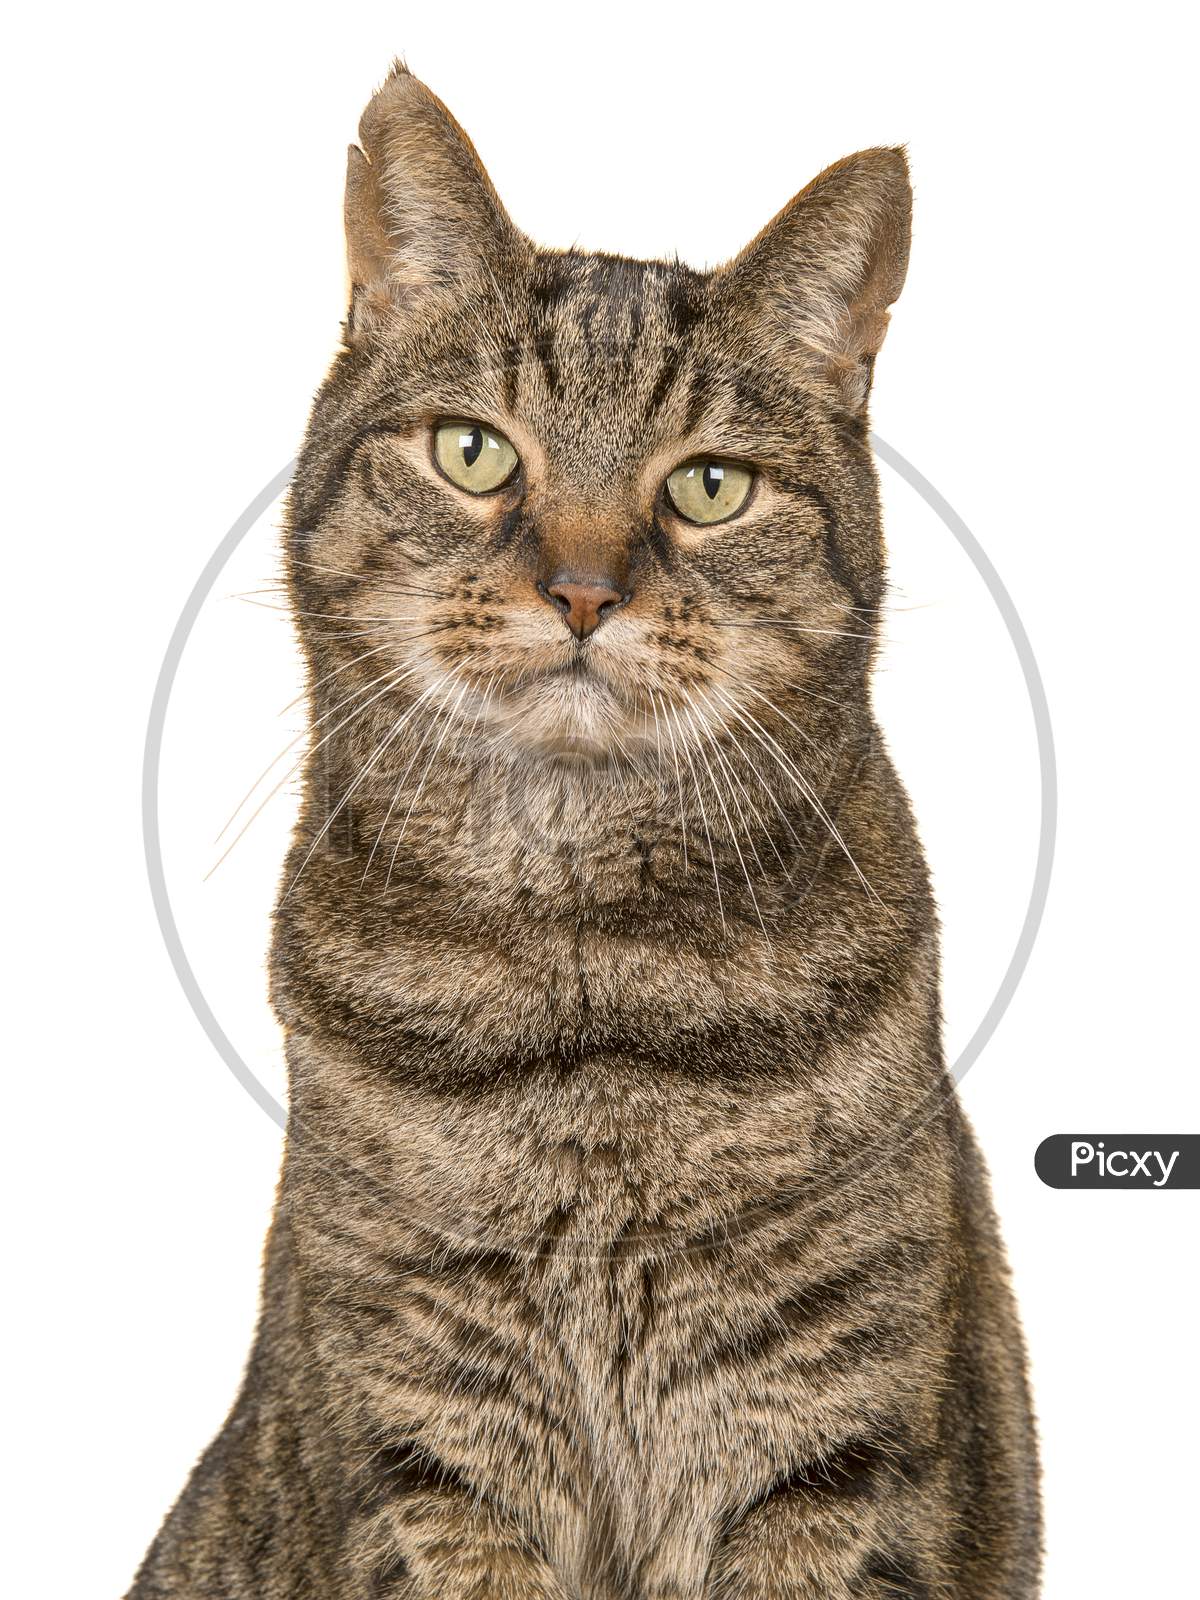 Portait Of A Tabby Cat Looking At The Camera On A White Background In A Vertical Image